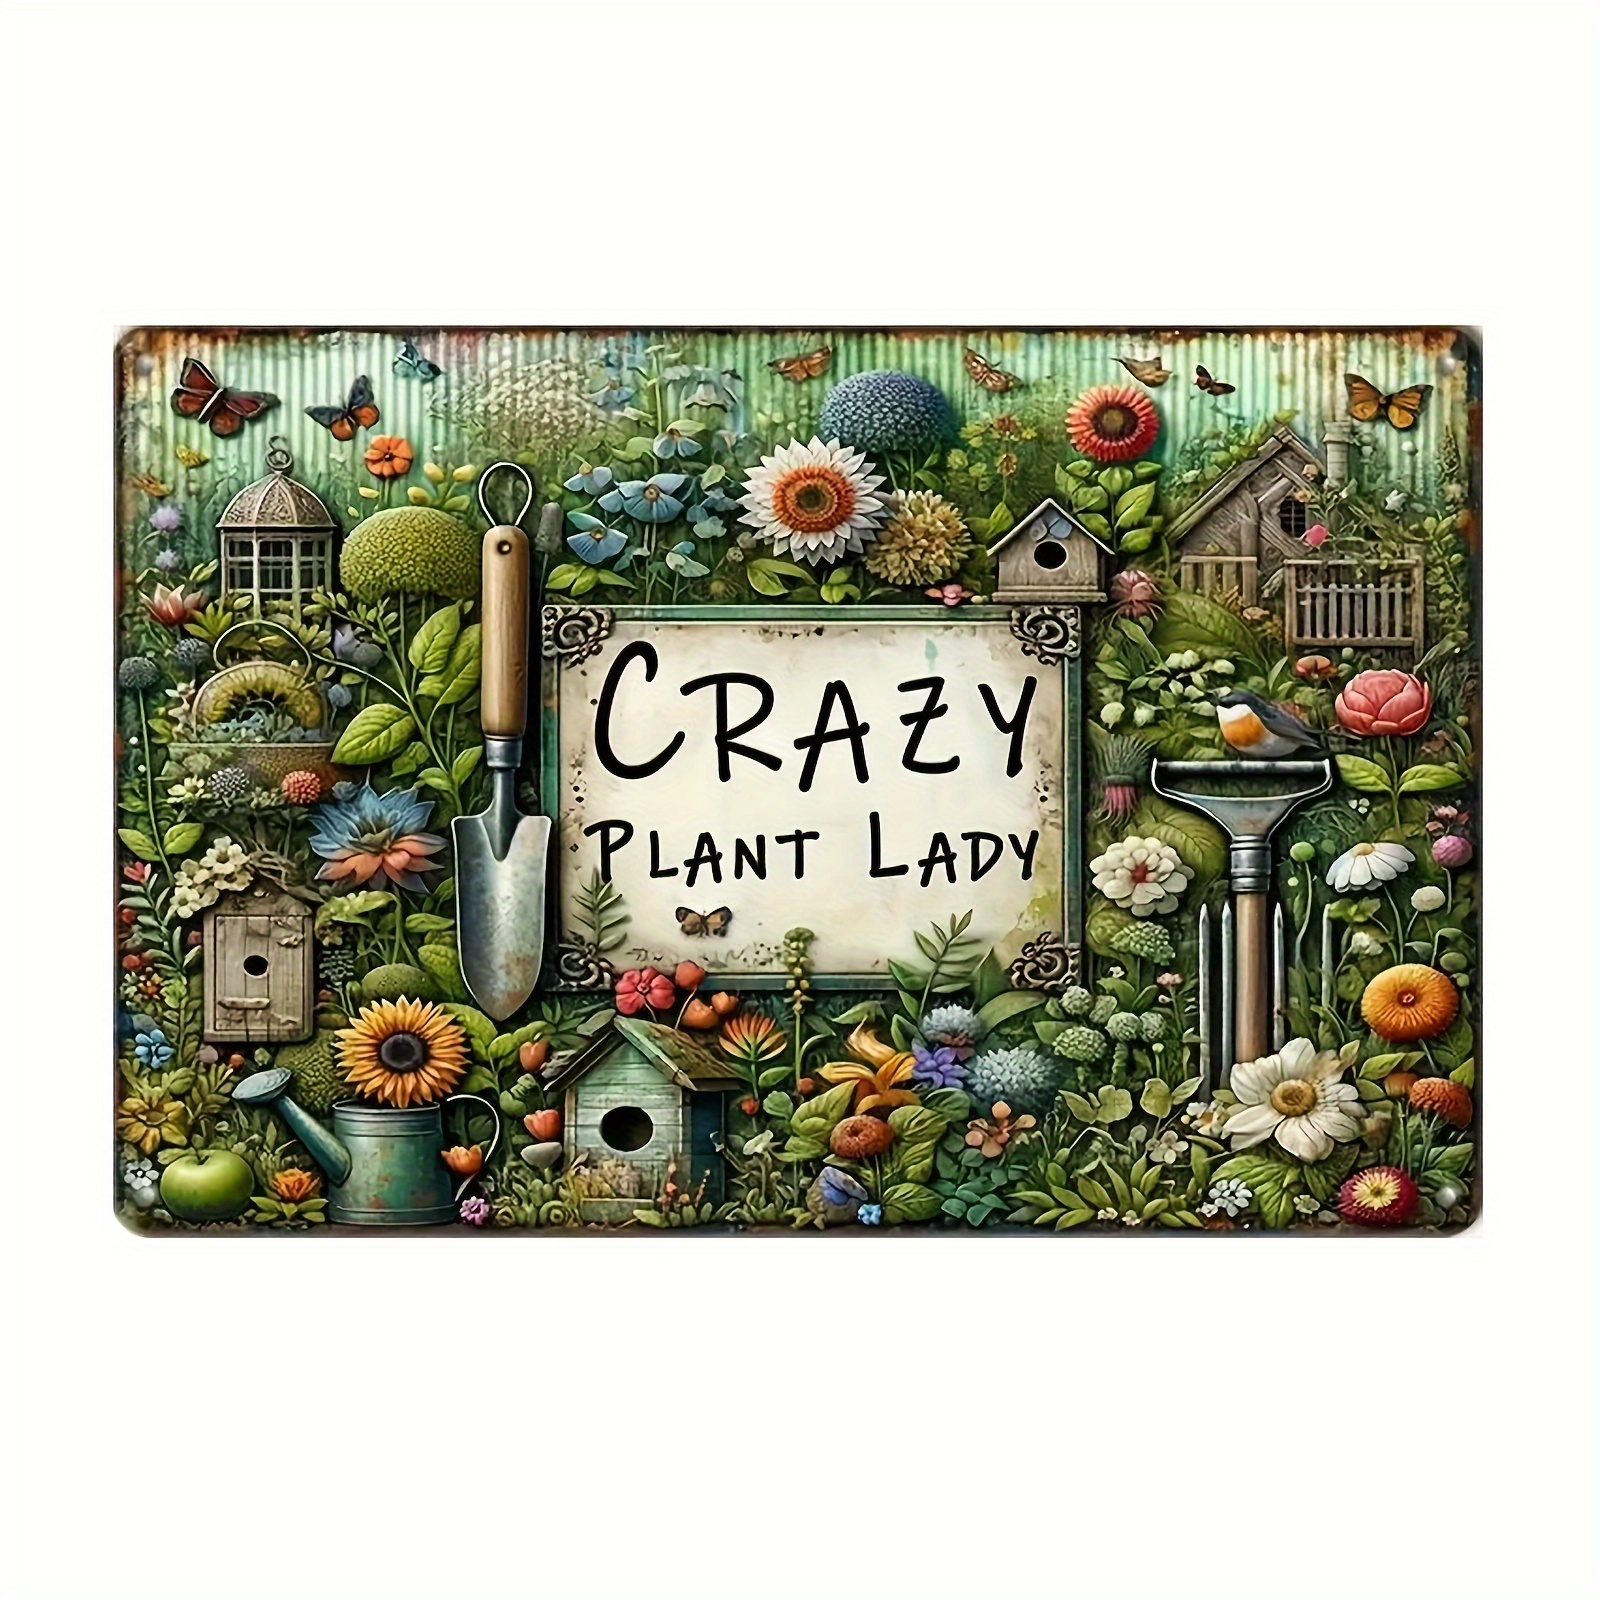 

Crazy Plant Lady" Vintage Metal Sign - 8x12 Inch | Perfect For Garden, Garage, Cafe, Or Living Room Decor